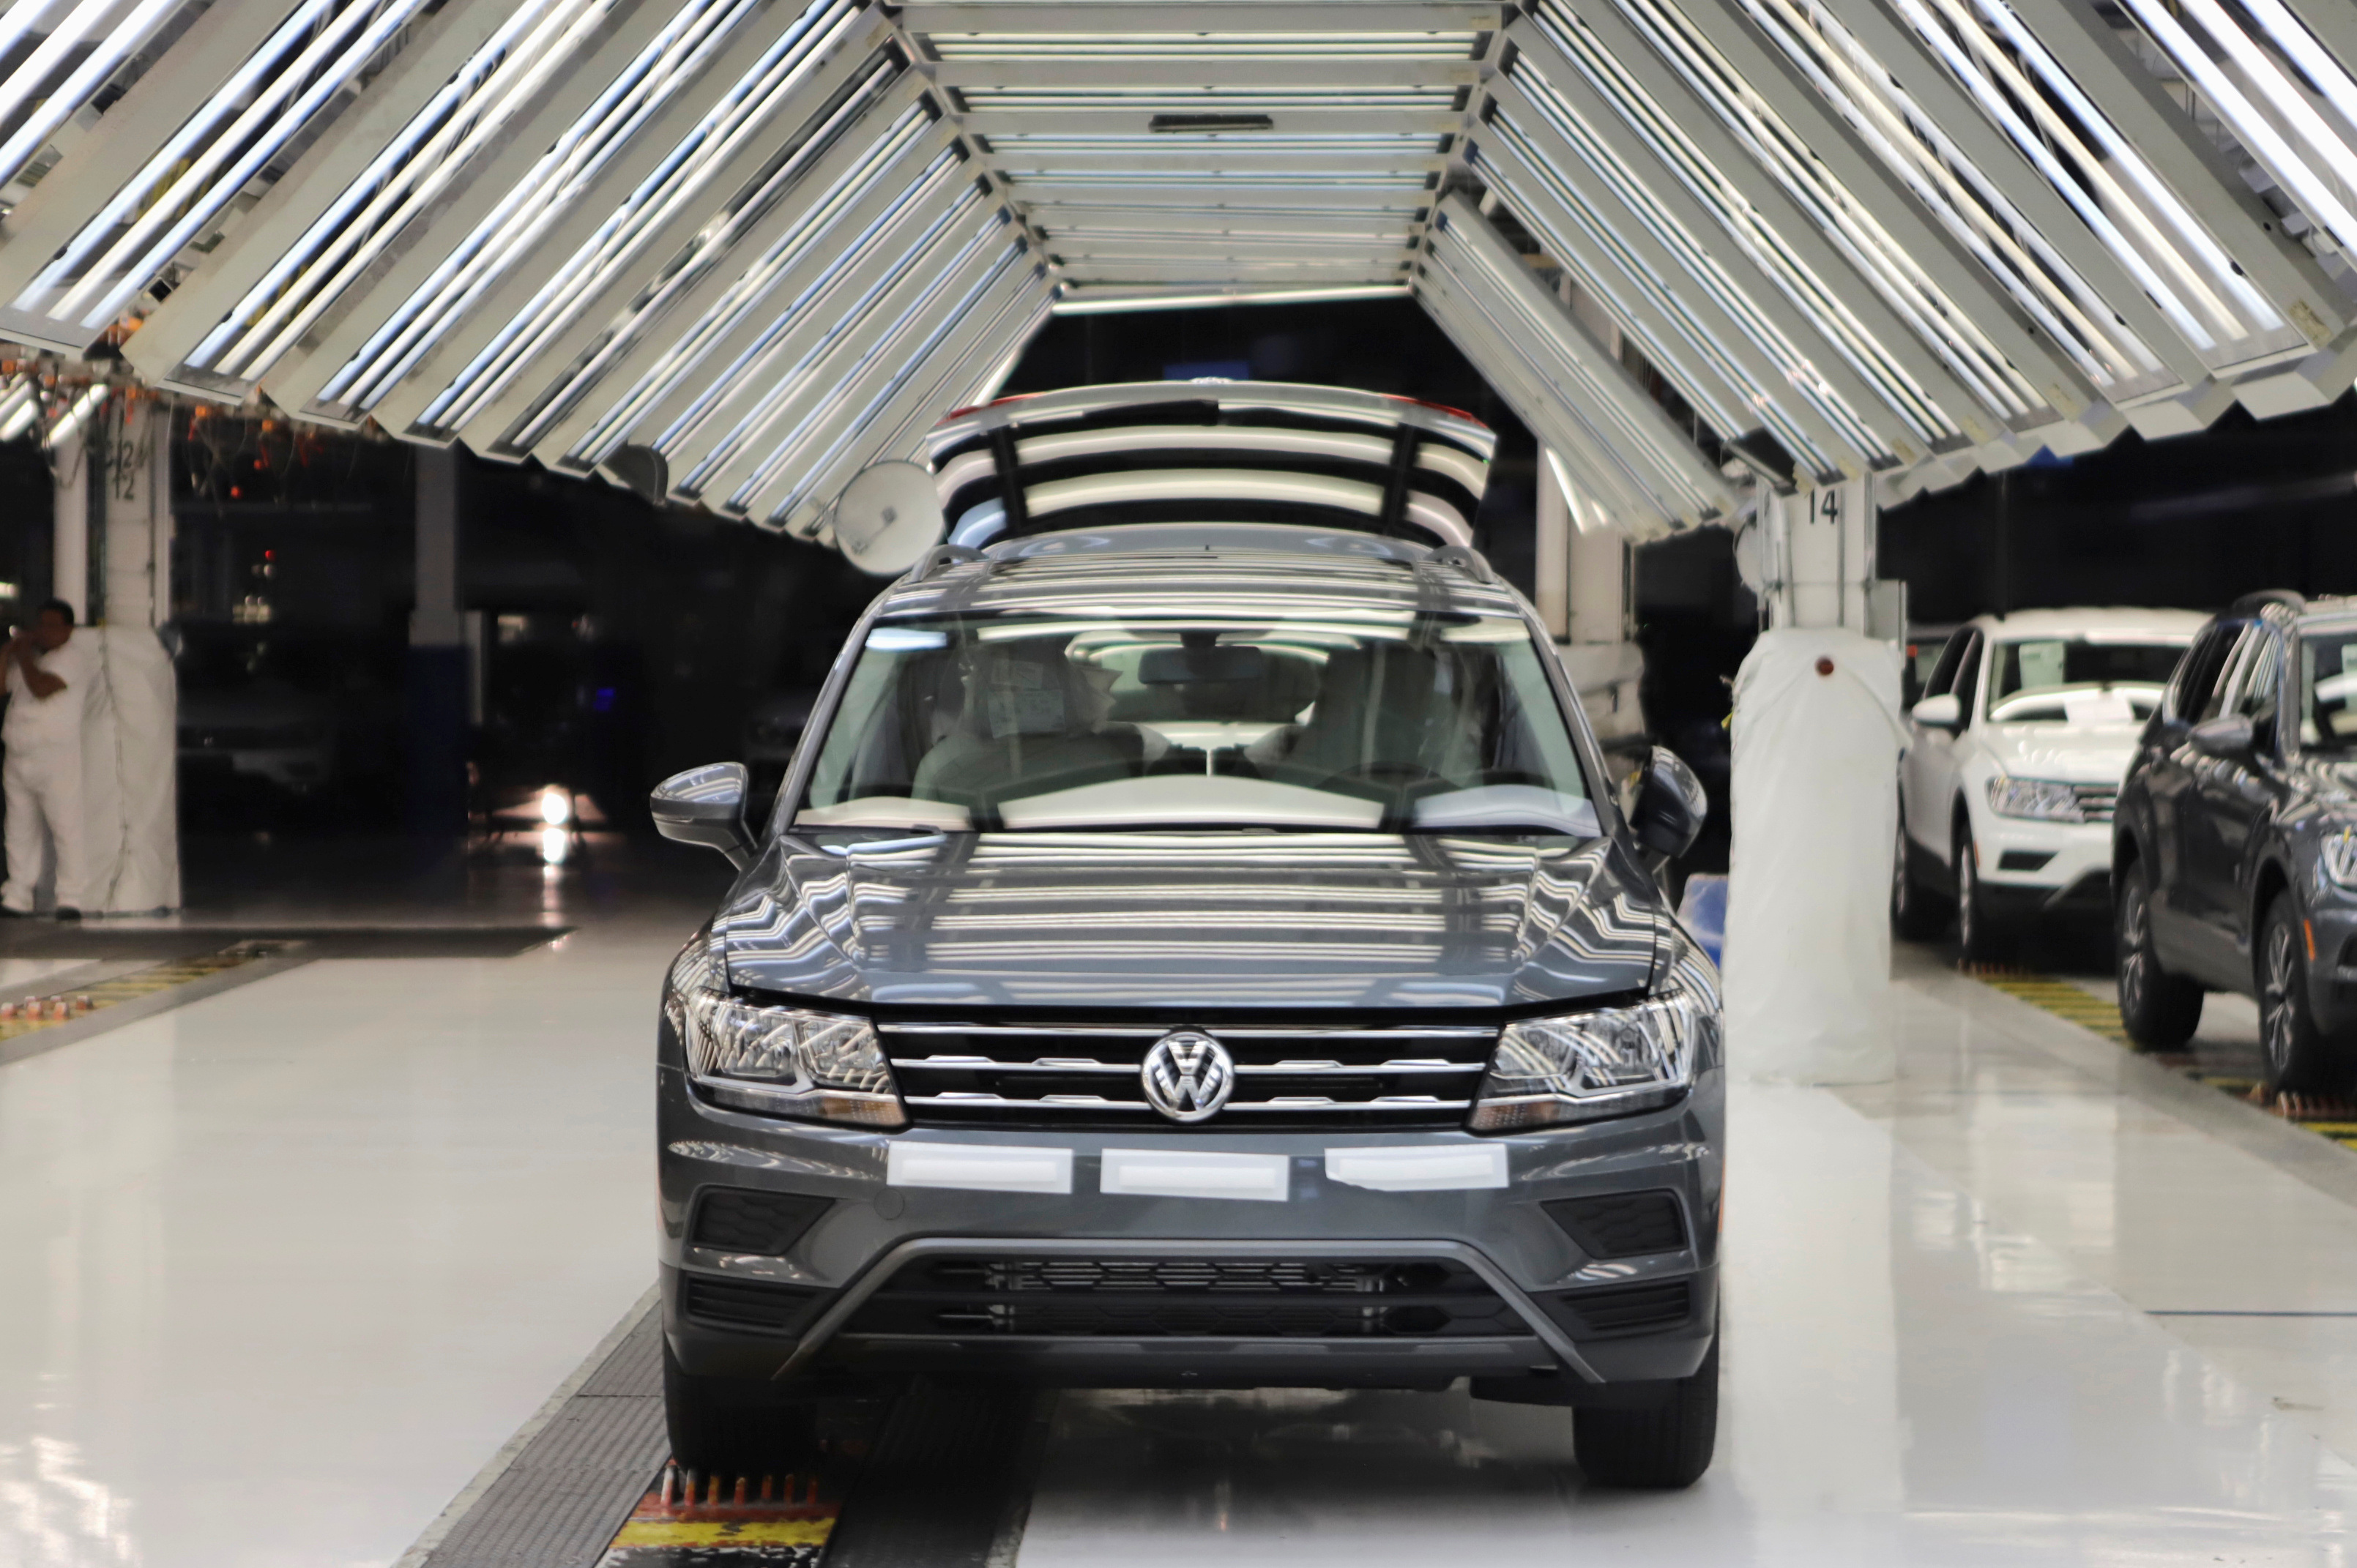 Volkswagen Tiguan cars are pictured in a production line at company's assembly plant in Puebla